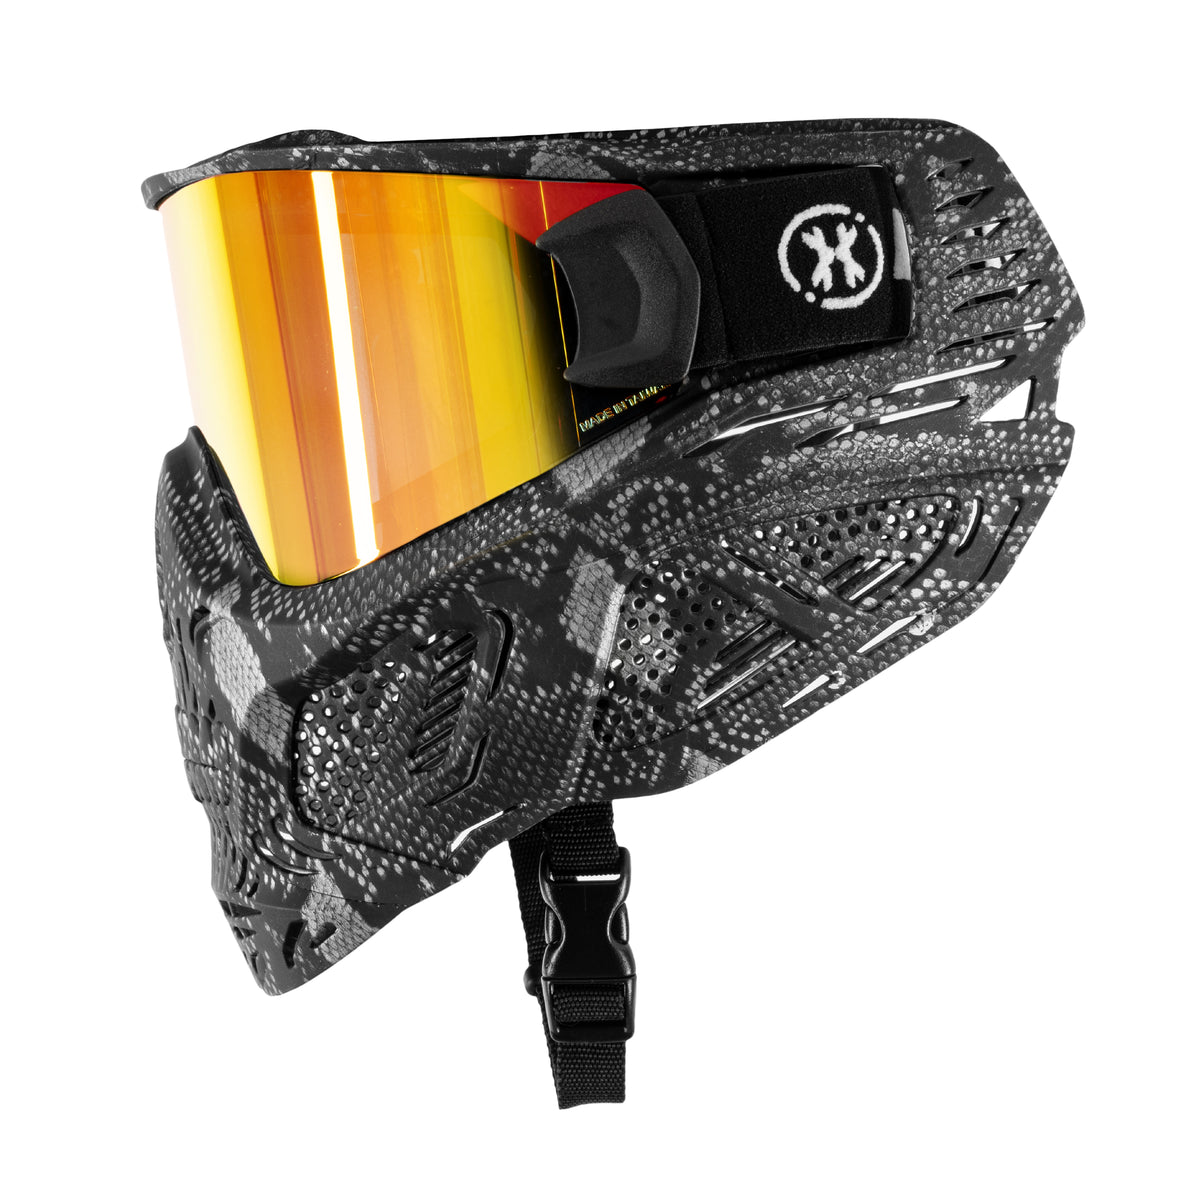 HSTL Skull Goggle "Snake Grey" W/ Fire Lens | Paintball Goggle | Mask | Hk Army